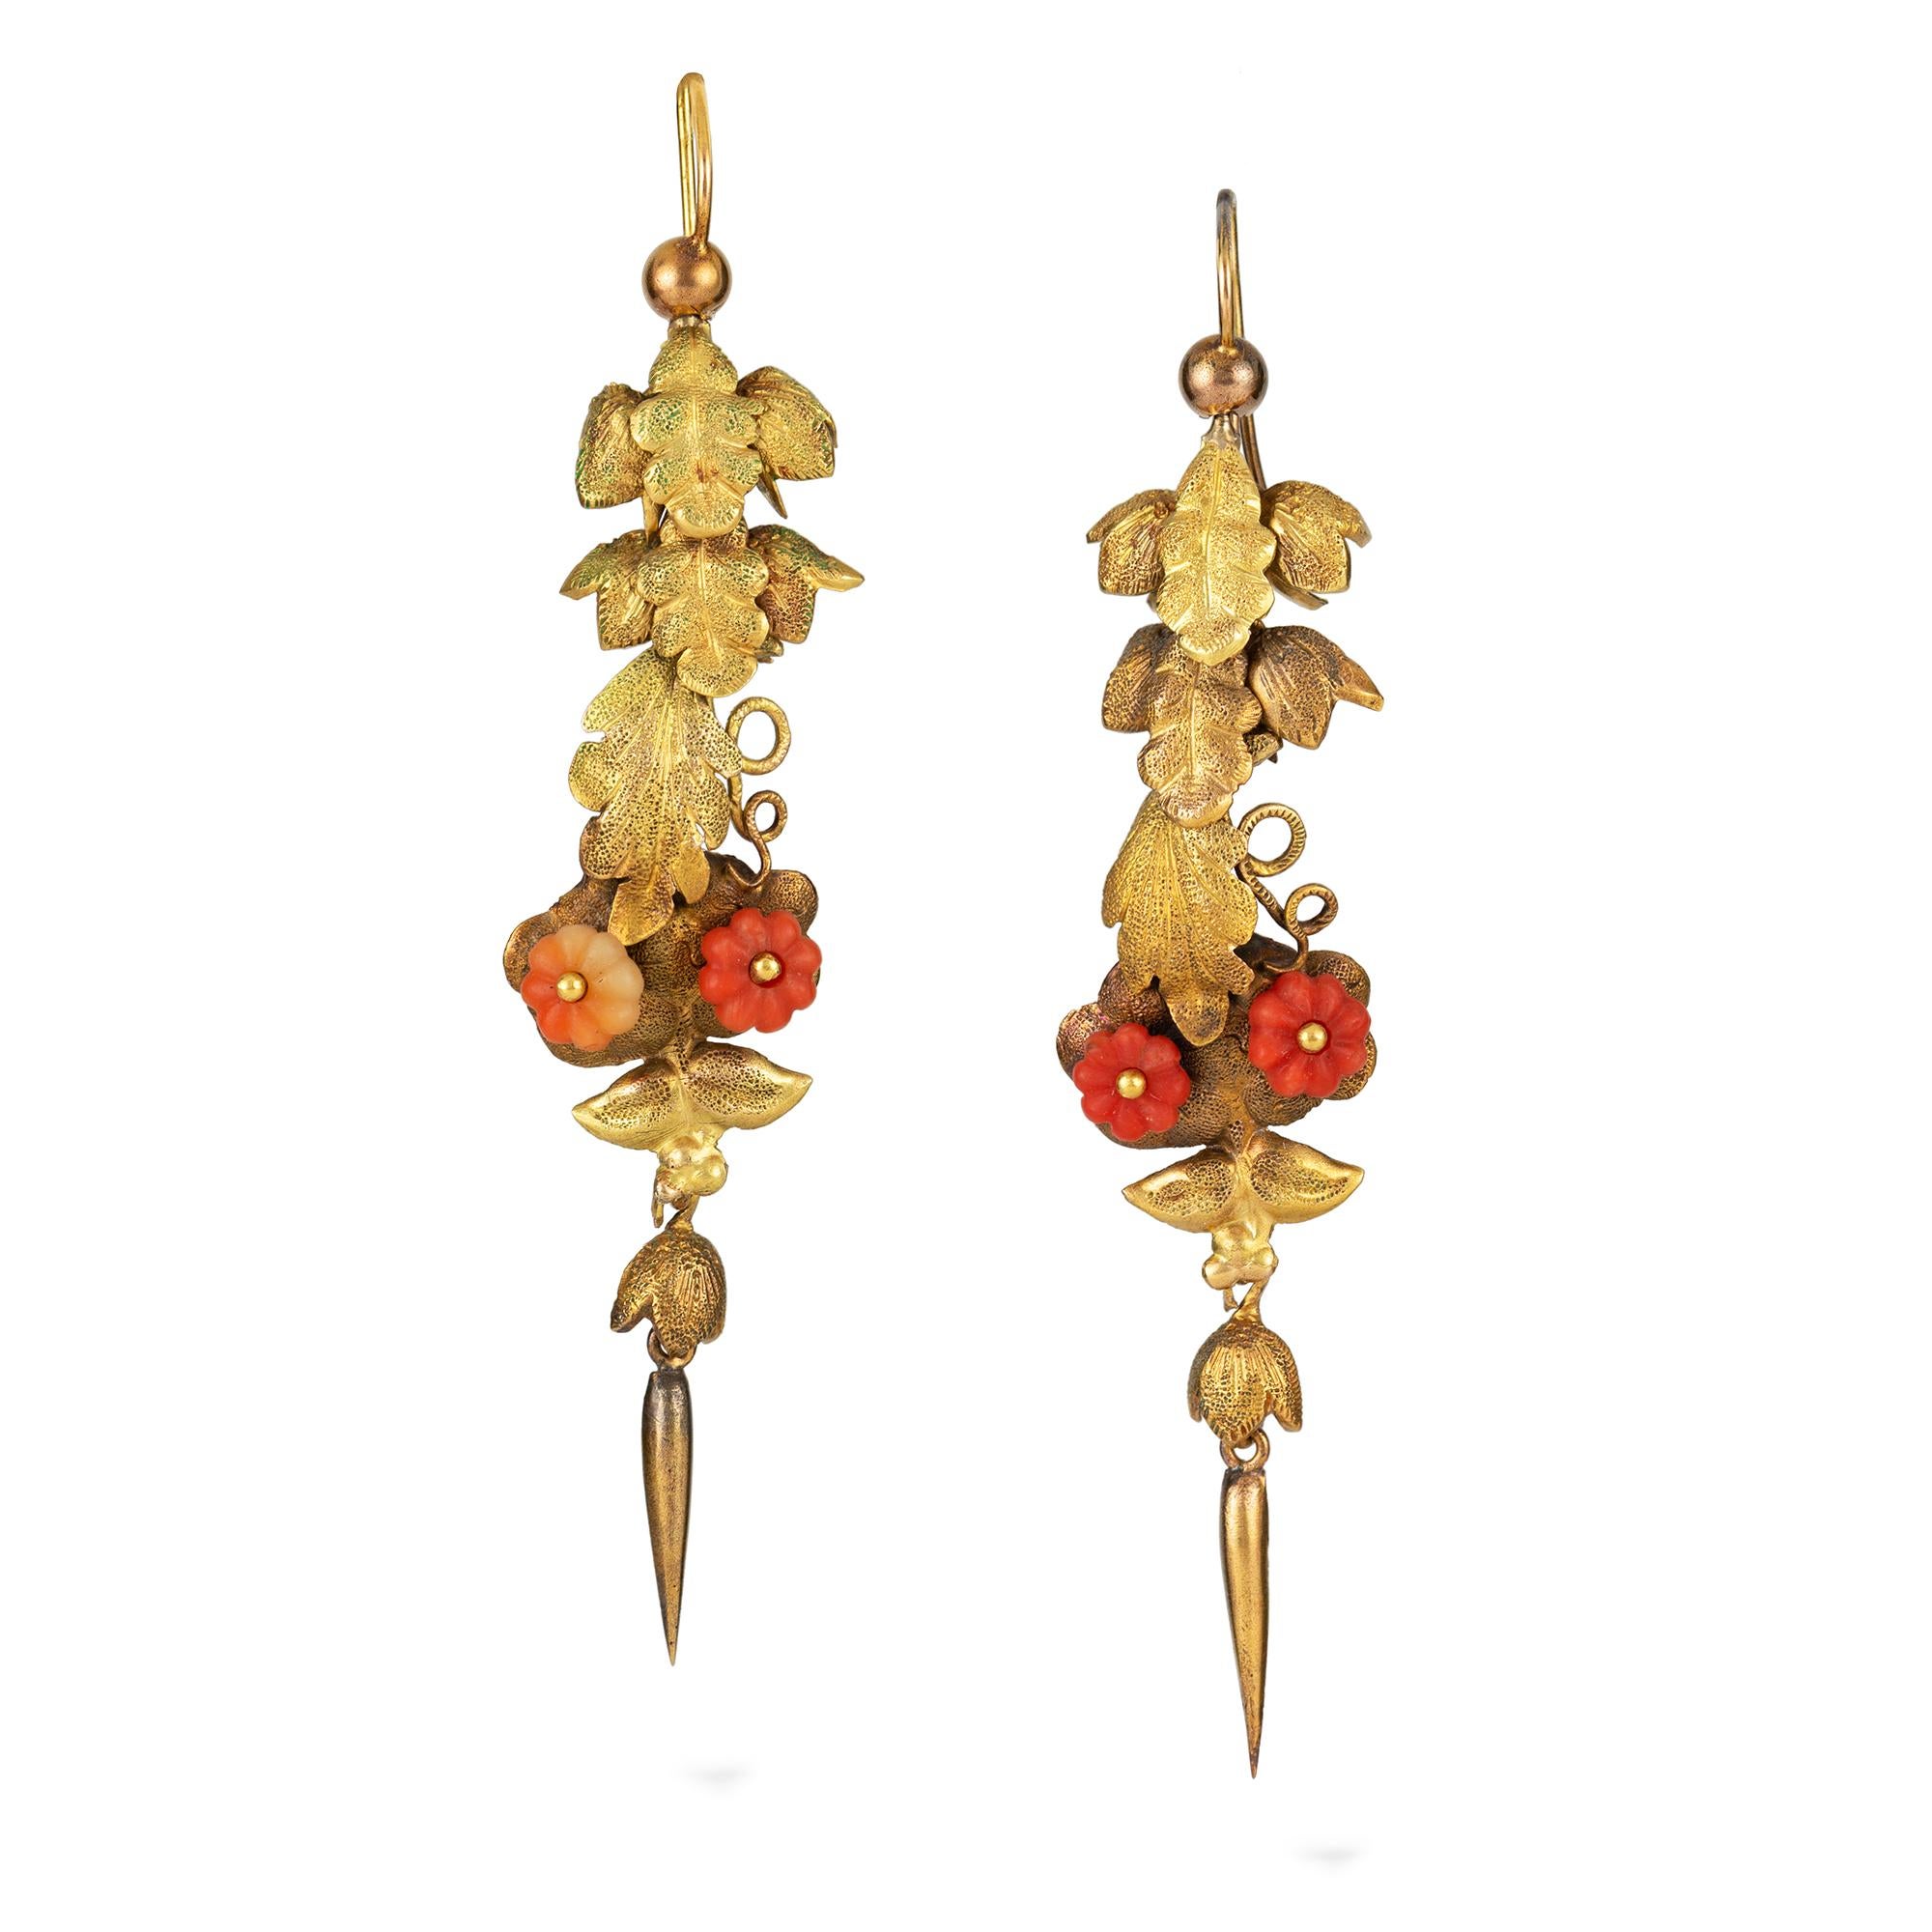 Bead Pair of Early Victorian Gold and Coral Leaf Drop Earrings